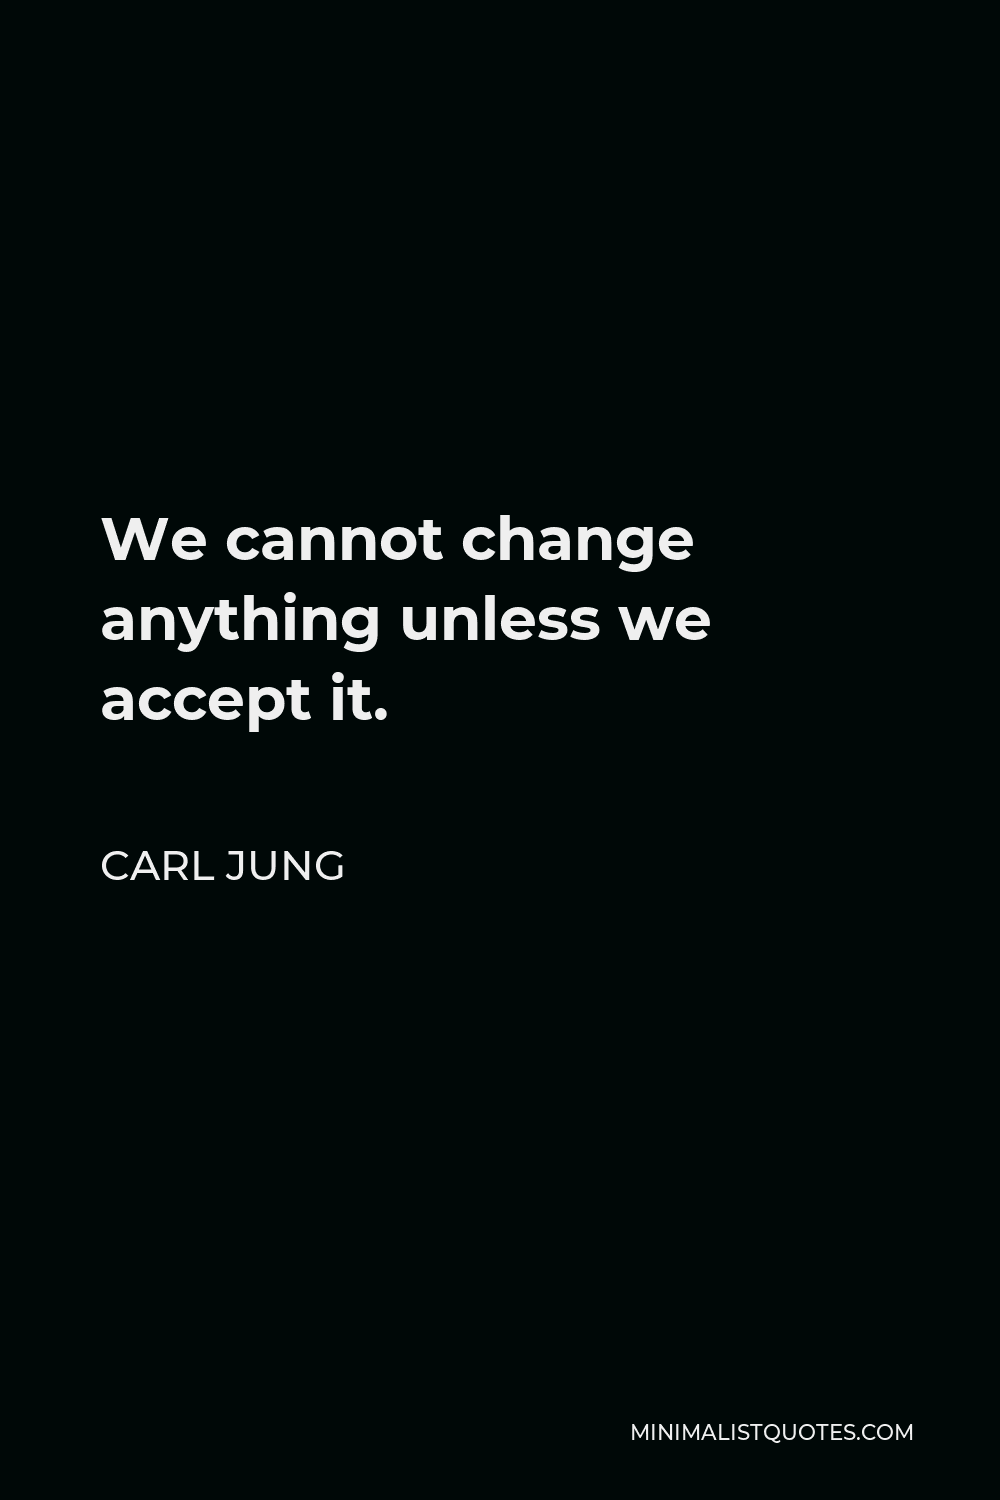 Carl Jung Quote - We cannot change anything unless we accept it.